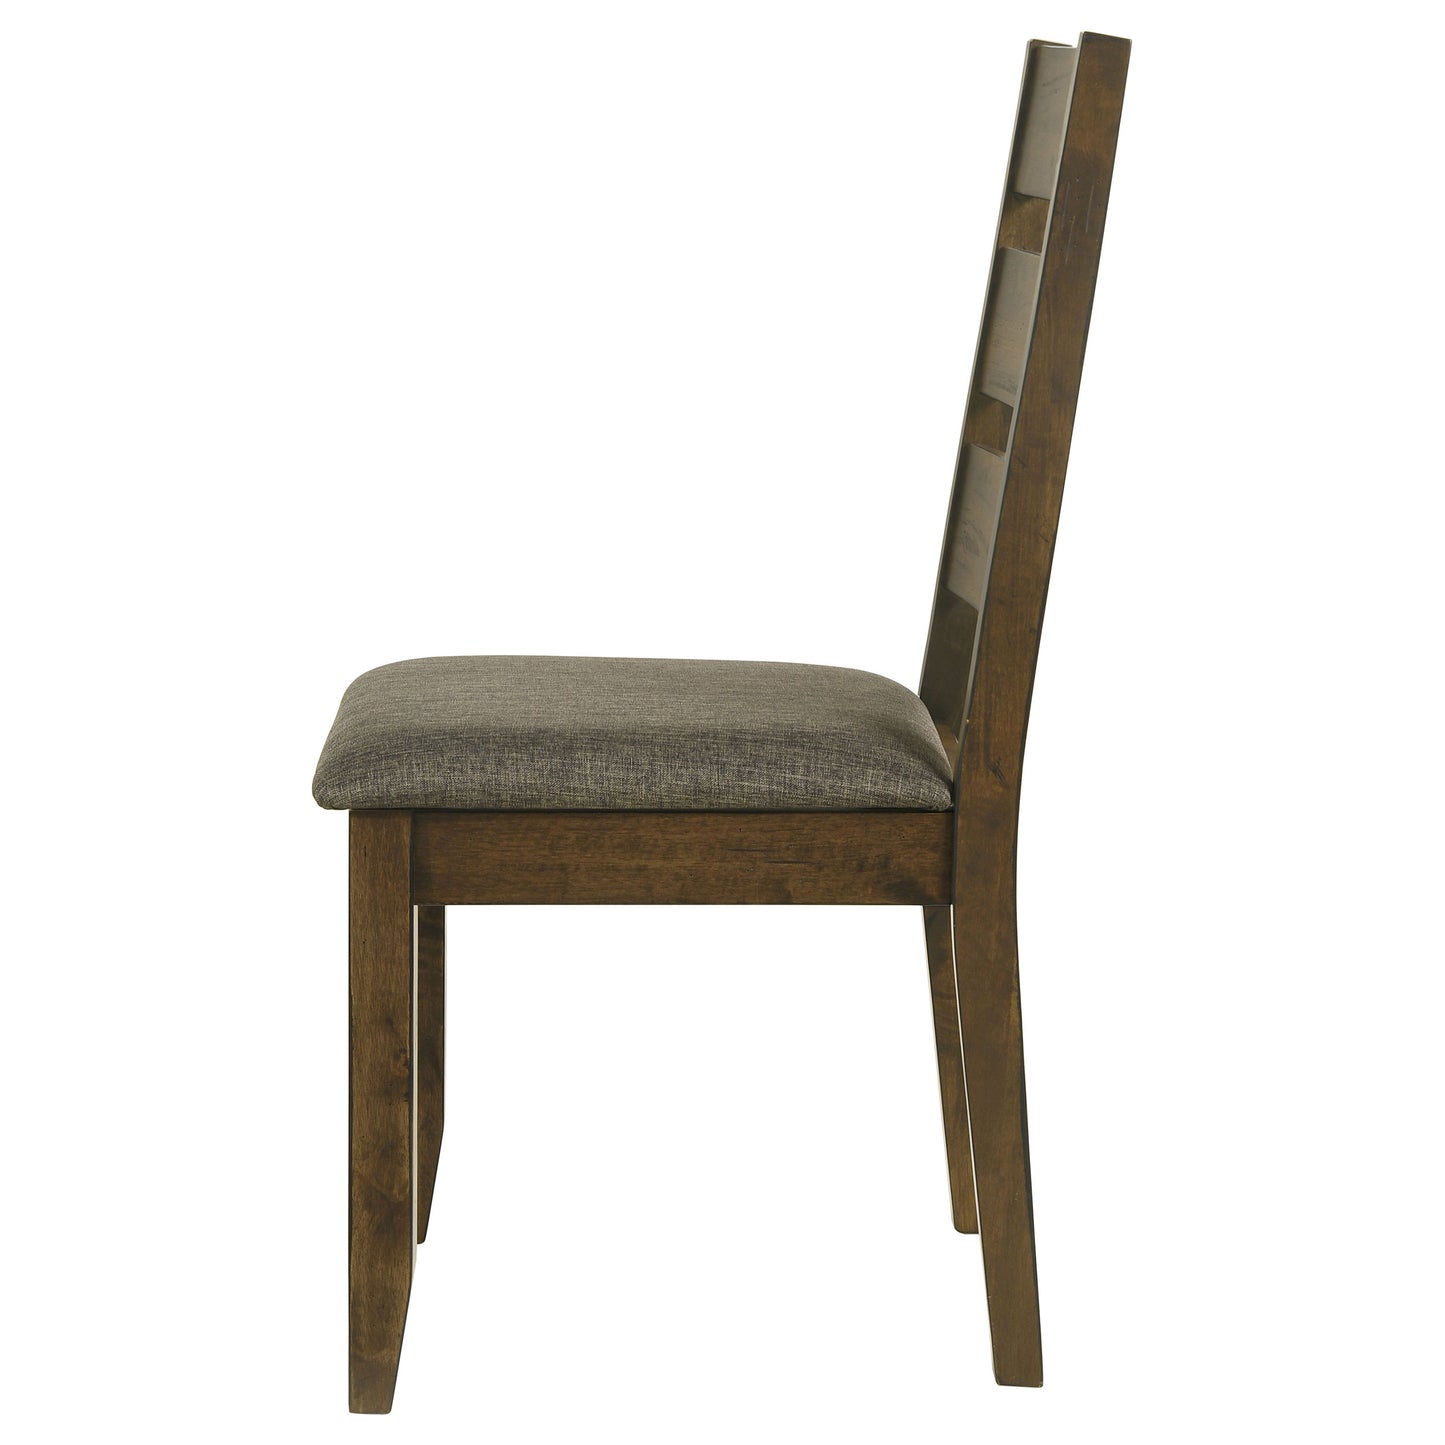 Alston Ladder Back Dining Side Chairs Knotty Nutmeg and Brown (Set of 2)